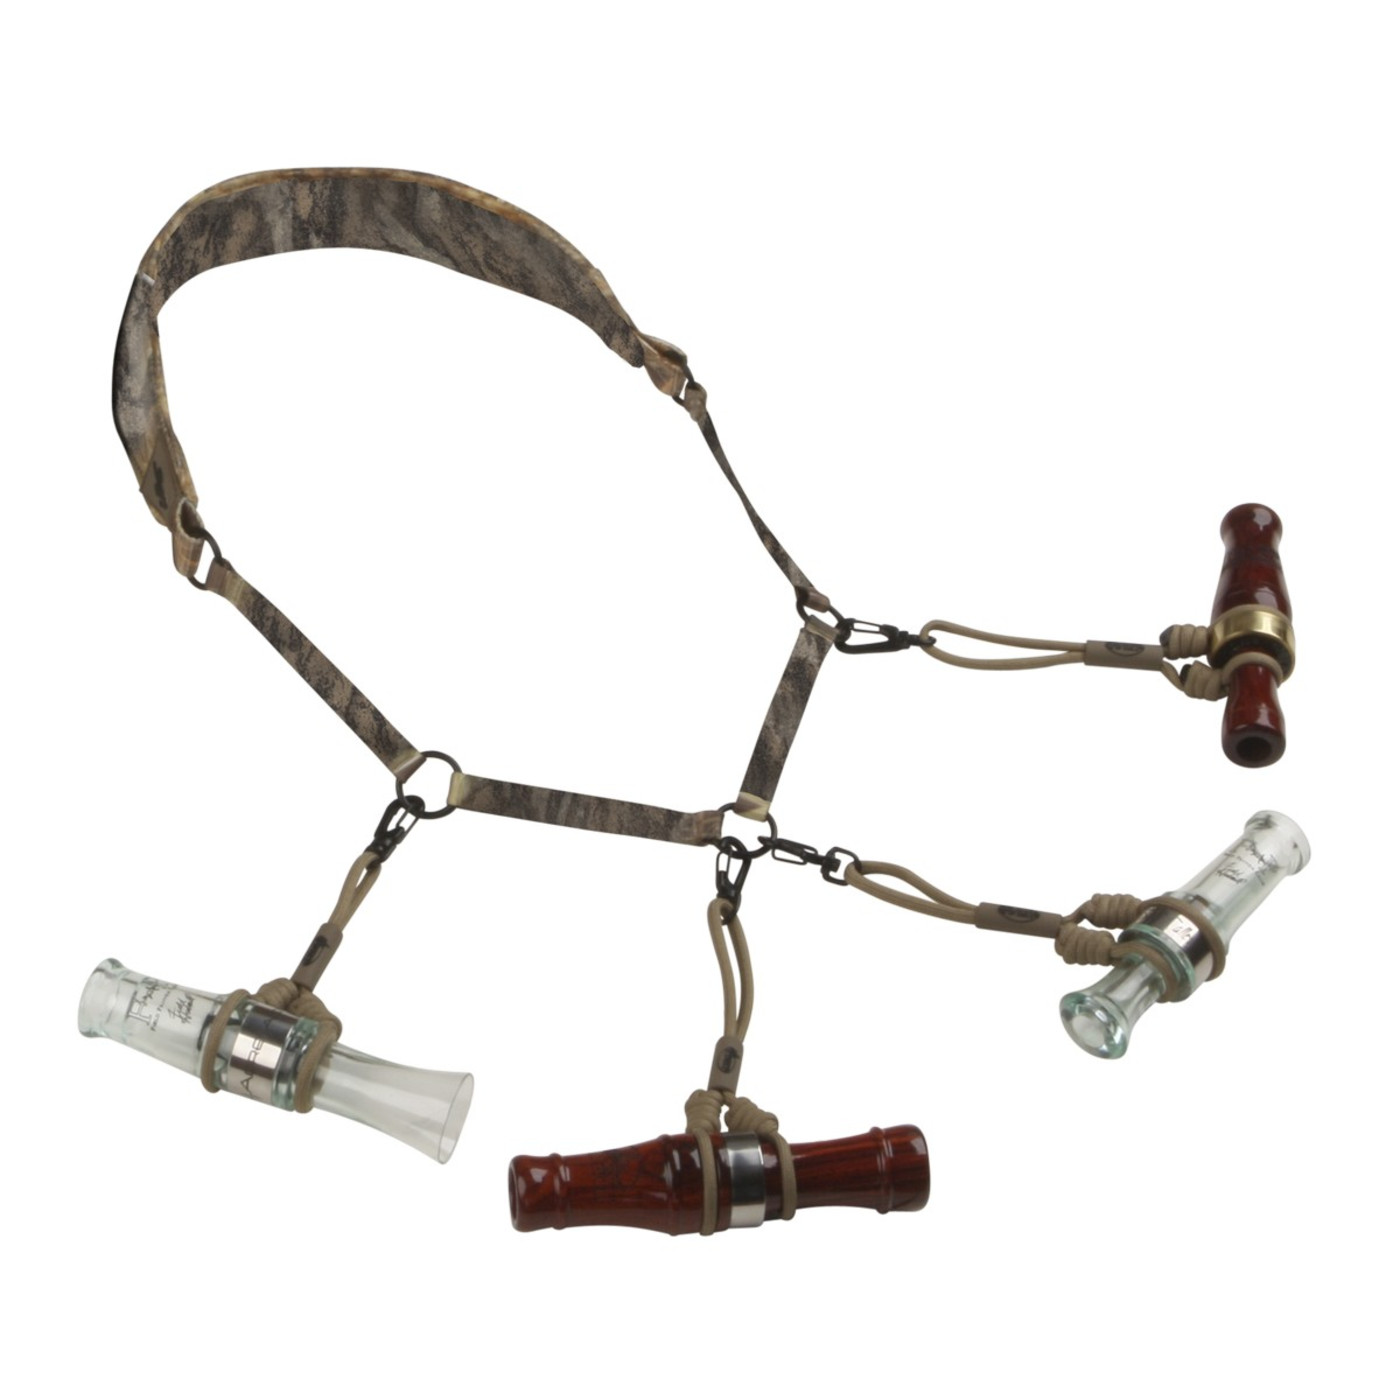 Avery Game Call Power Lanyard in Mossy Oak Bottomland Color